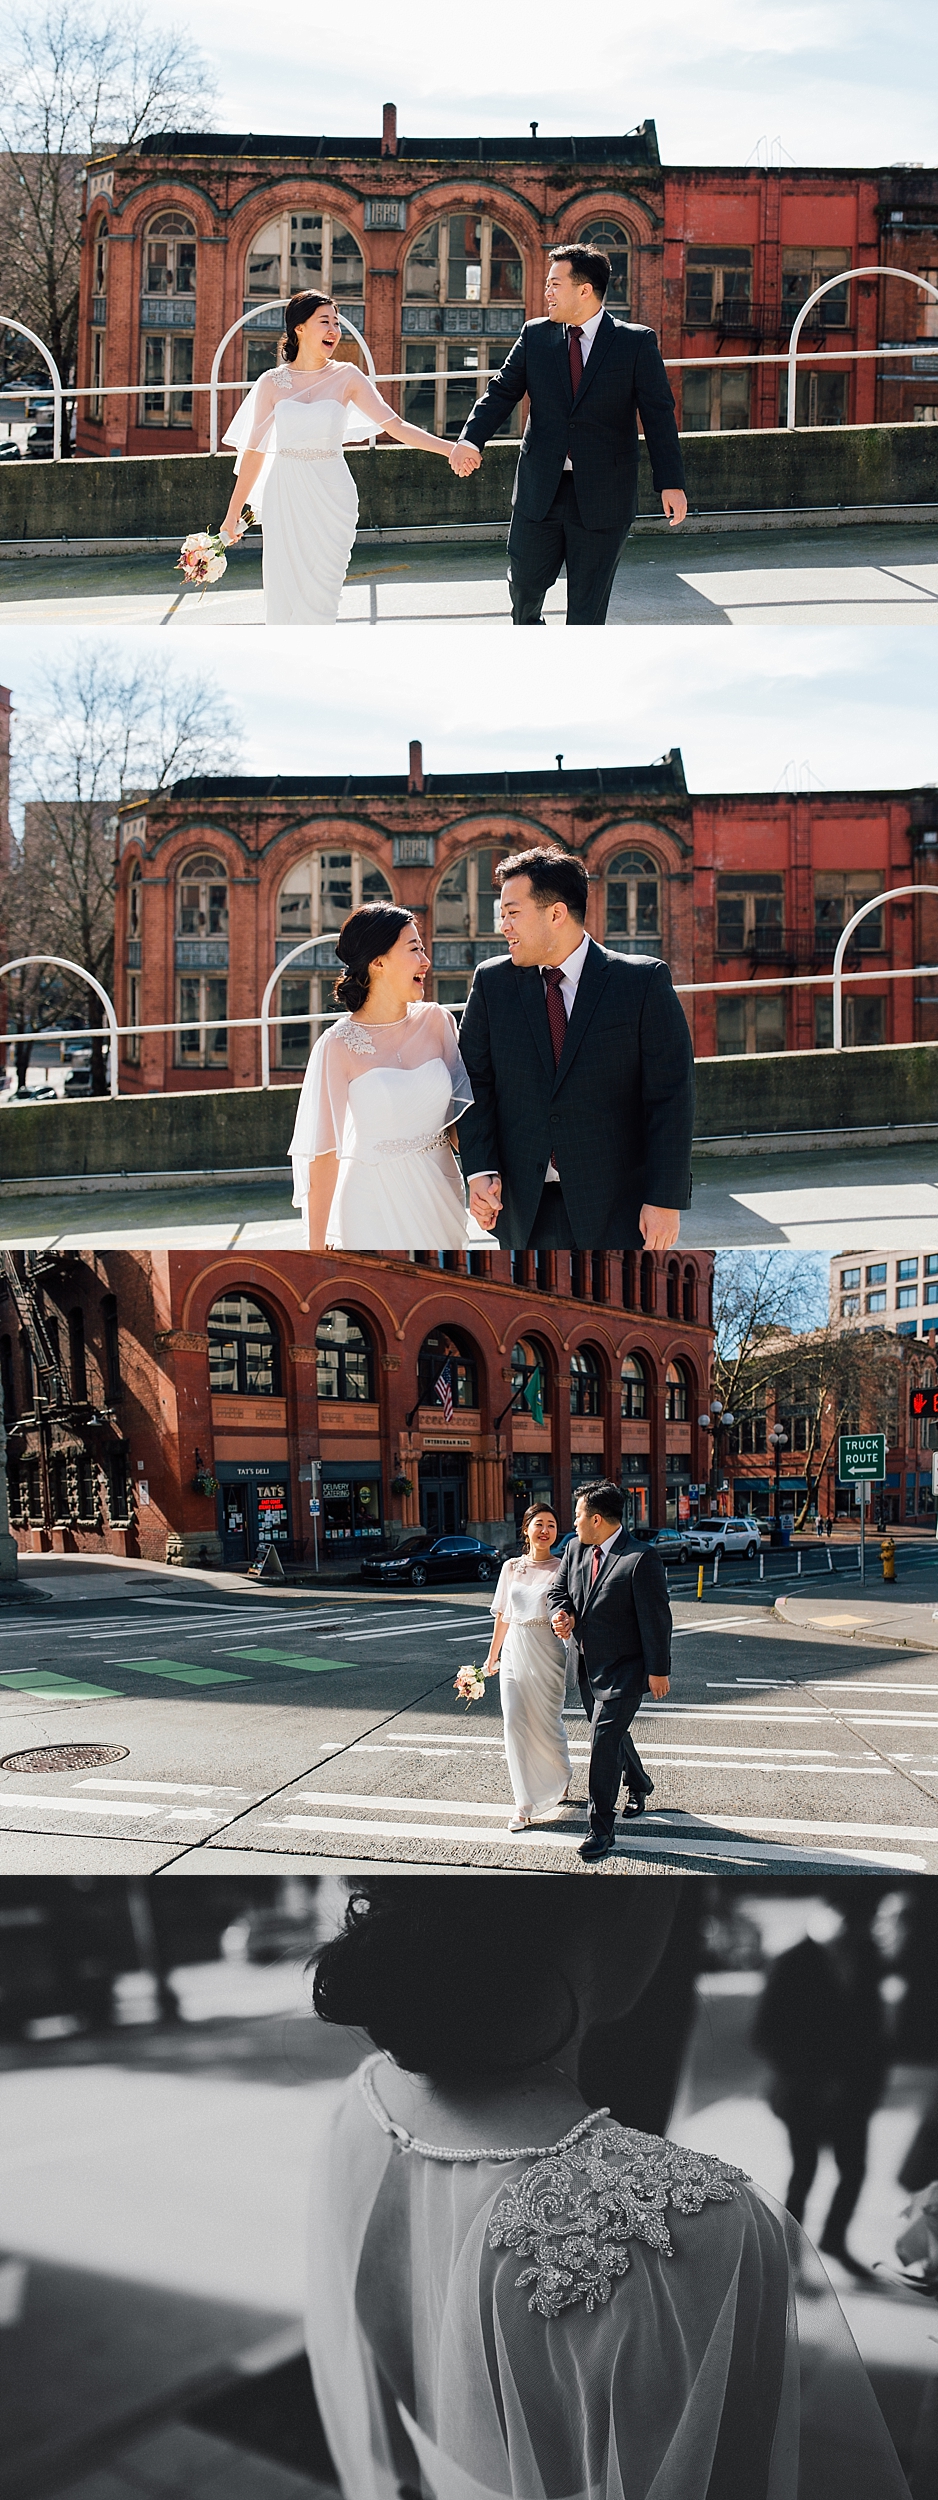 Seattle Courthouse Wedding Photographer PNW elopement Photography - Annie & Alan - Ashley Vos Photography-4.jpg